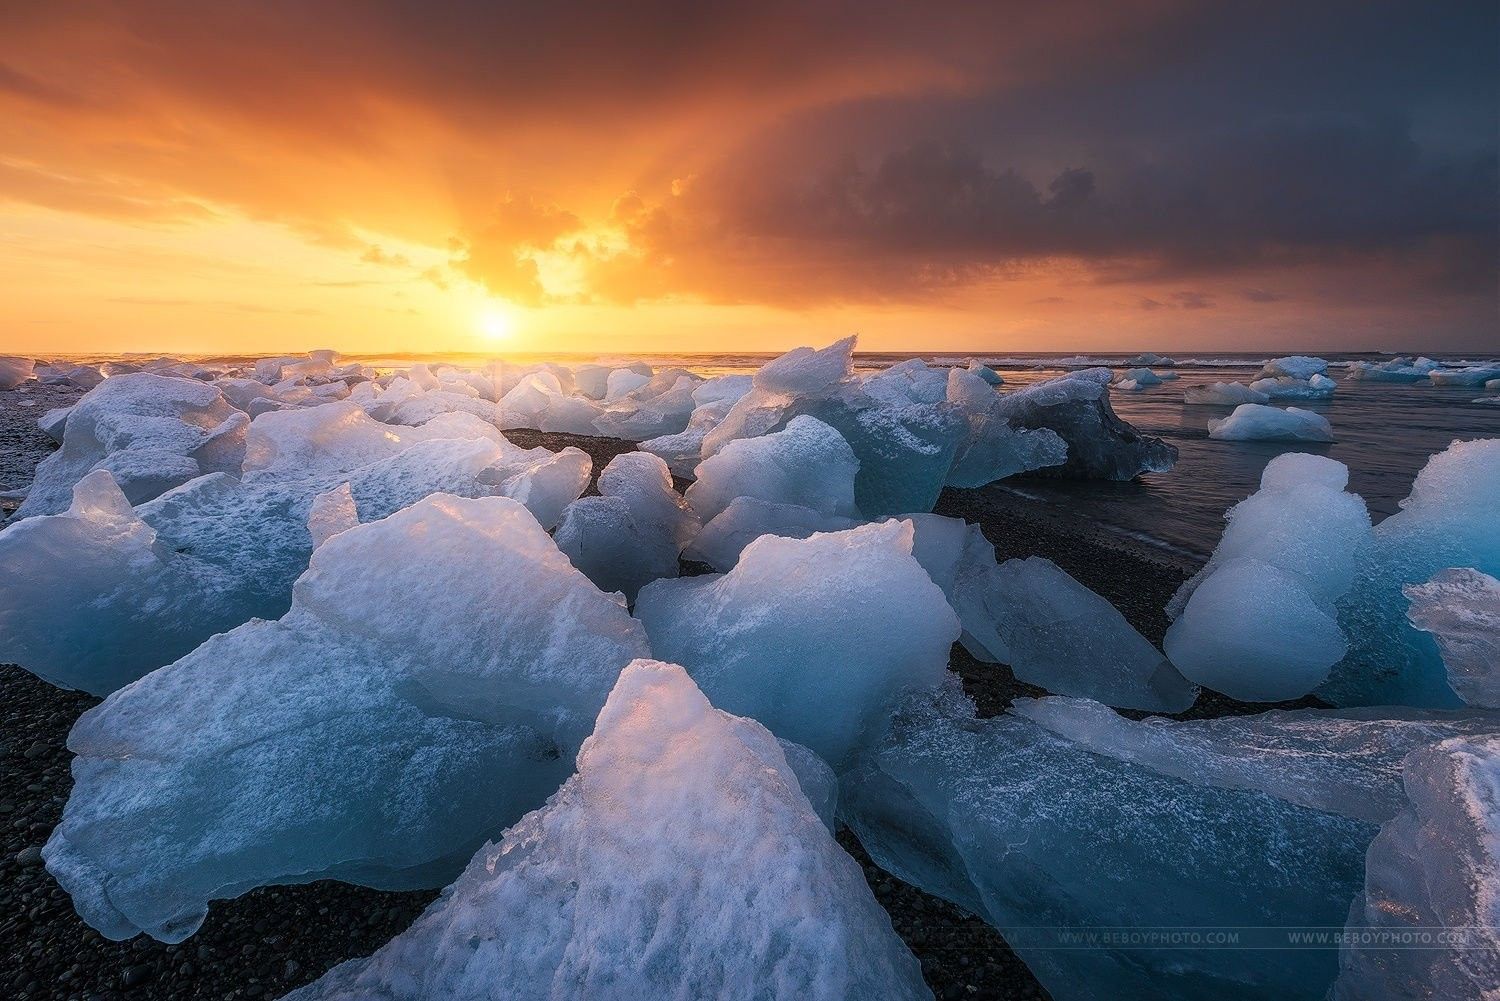 Original, Sunrise, Windows, Apple, Abstract HD Wallpaper, Beach, Colorful, Sunset, Iceberg, Photo, Landscape, Picture, Cube, Clouds Ice